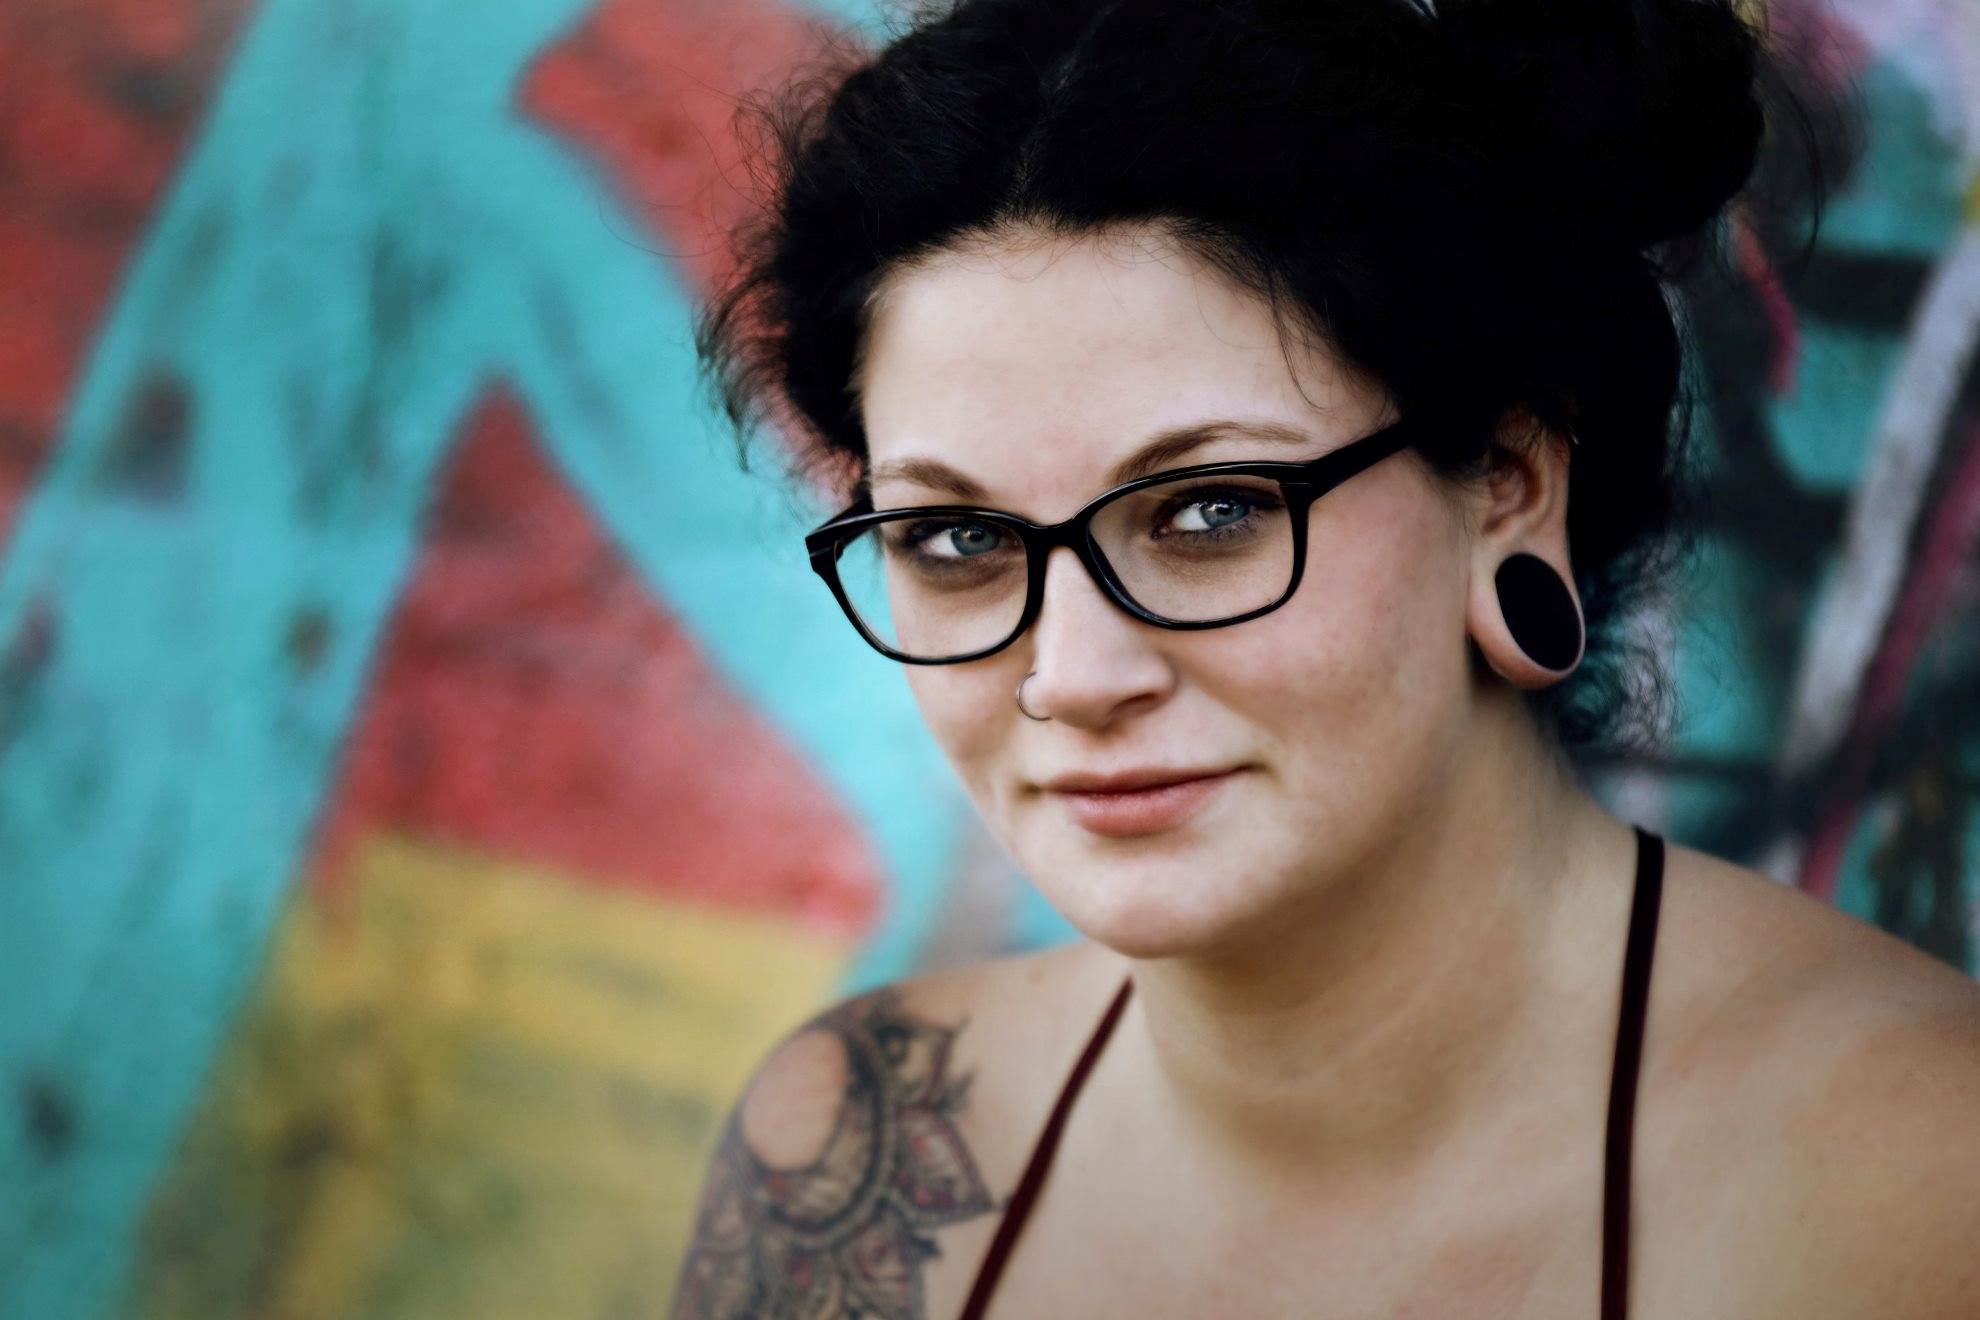 Person with glasses and a shoulder tattoo